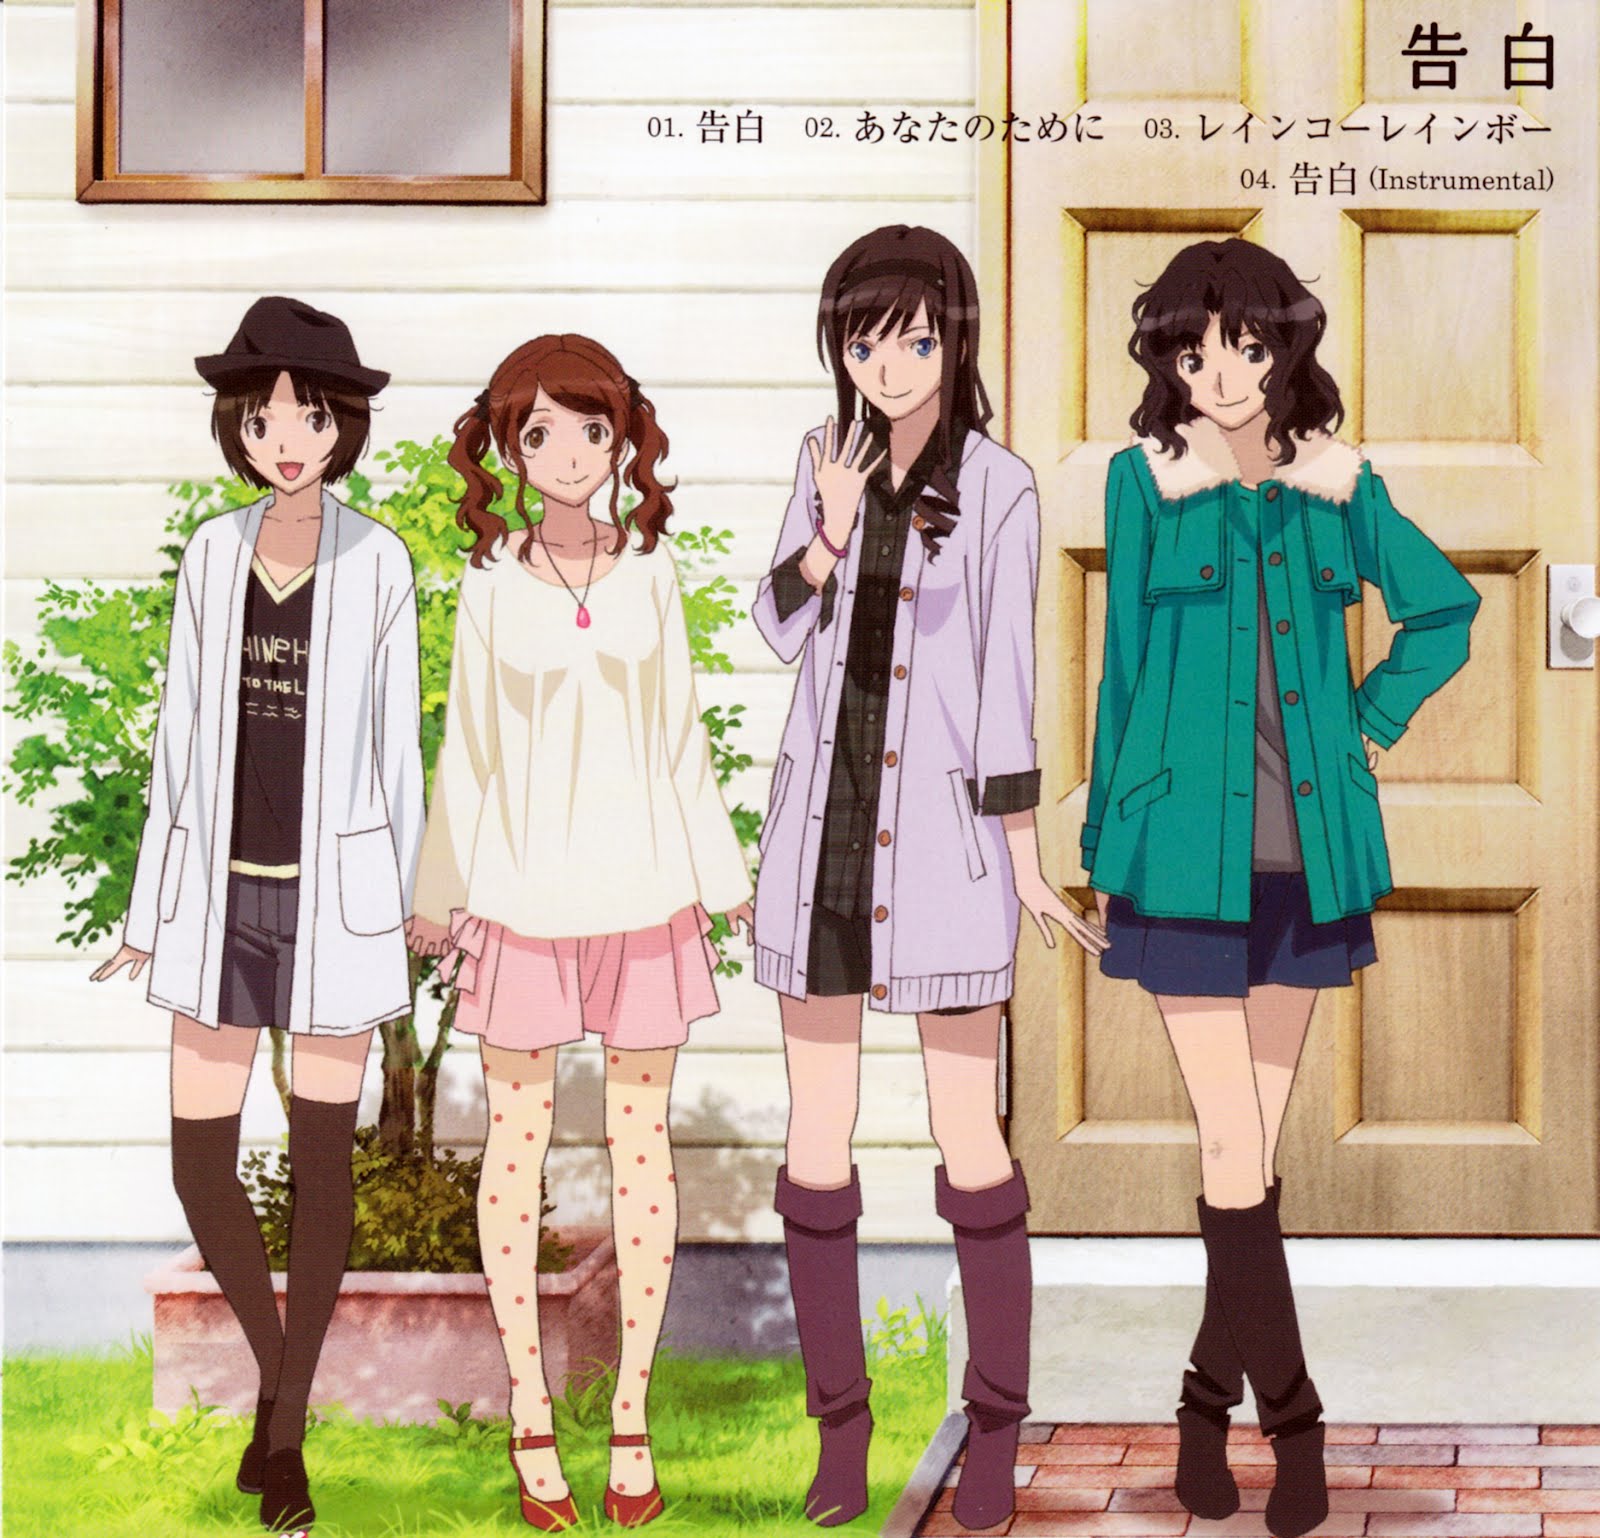 album_cover amagami black_hair blue_eyes boots bracelet brown_eyes brown_hair bush casual coat cover crossed_legs_(standing) door fedora grass hairband hand_holding hand_on_hip hat highres holding_hands jewelry knee_boots light_smile long_hair messy_hair morishima_haruka multiple_girls nakata_sae necklace official_art open_mouth outdoors polka_dot polka_dot_legwear scan shorts skirt smile tachibana_miya tanamachi_kaoru thigh-highs thighhighs translated twintails wavy_hair window